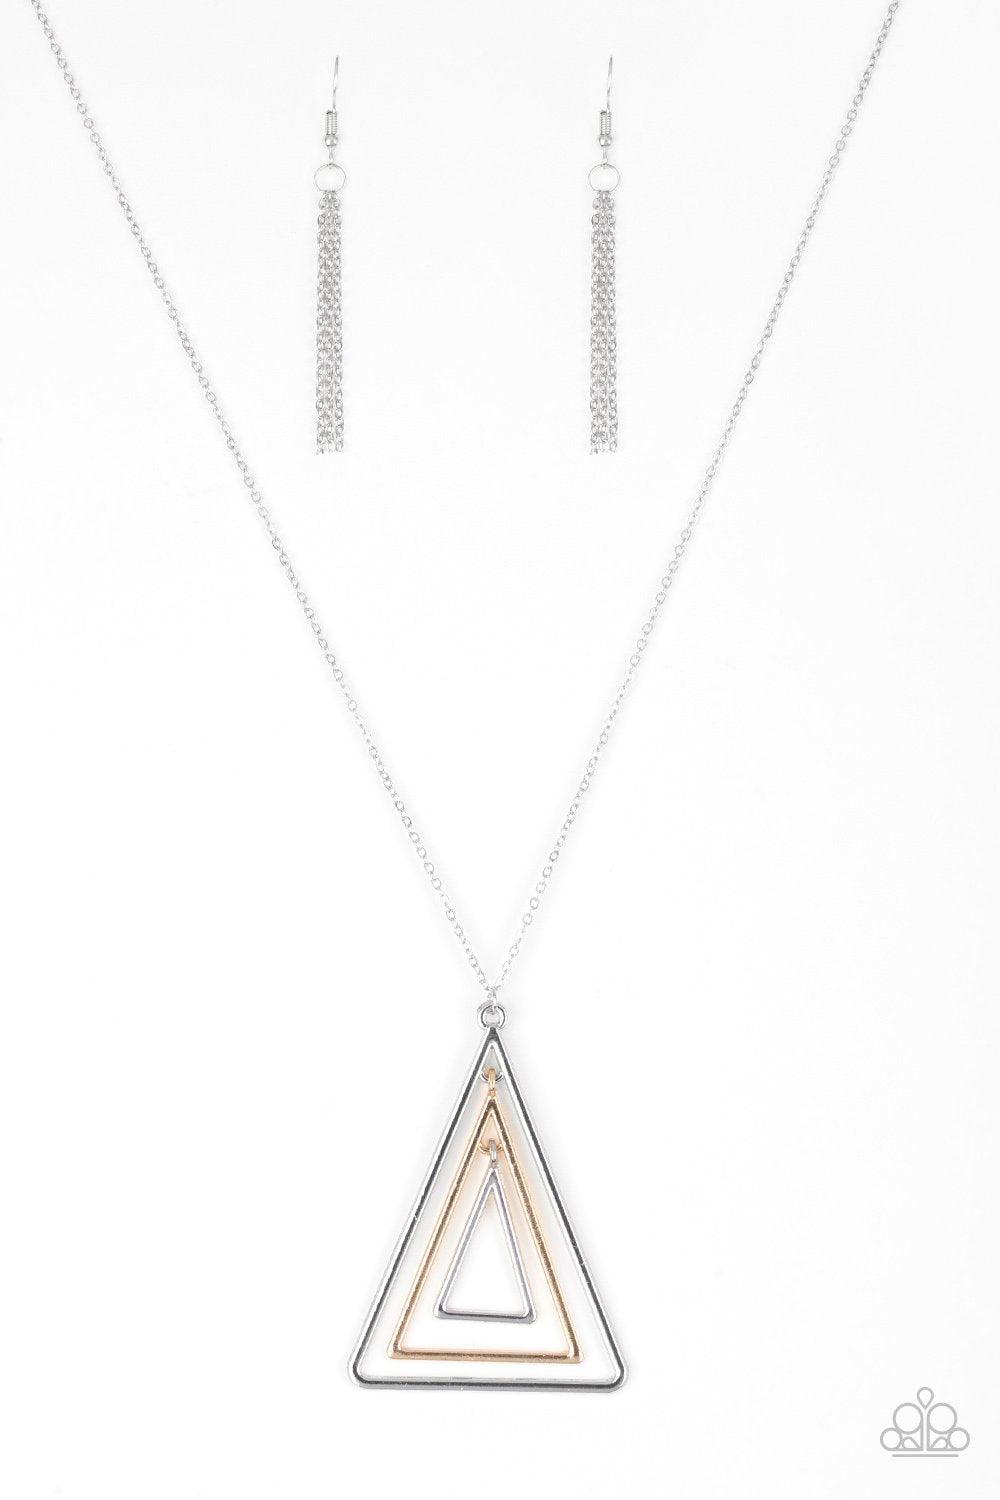 TRI Harder Silver and Gold Necklace - Paparazzi Accessories - lightbox -CarasShop.com - $5 Jewelry by Cara Jewels